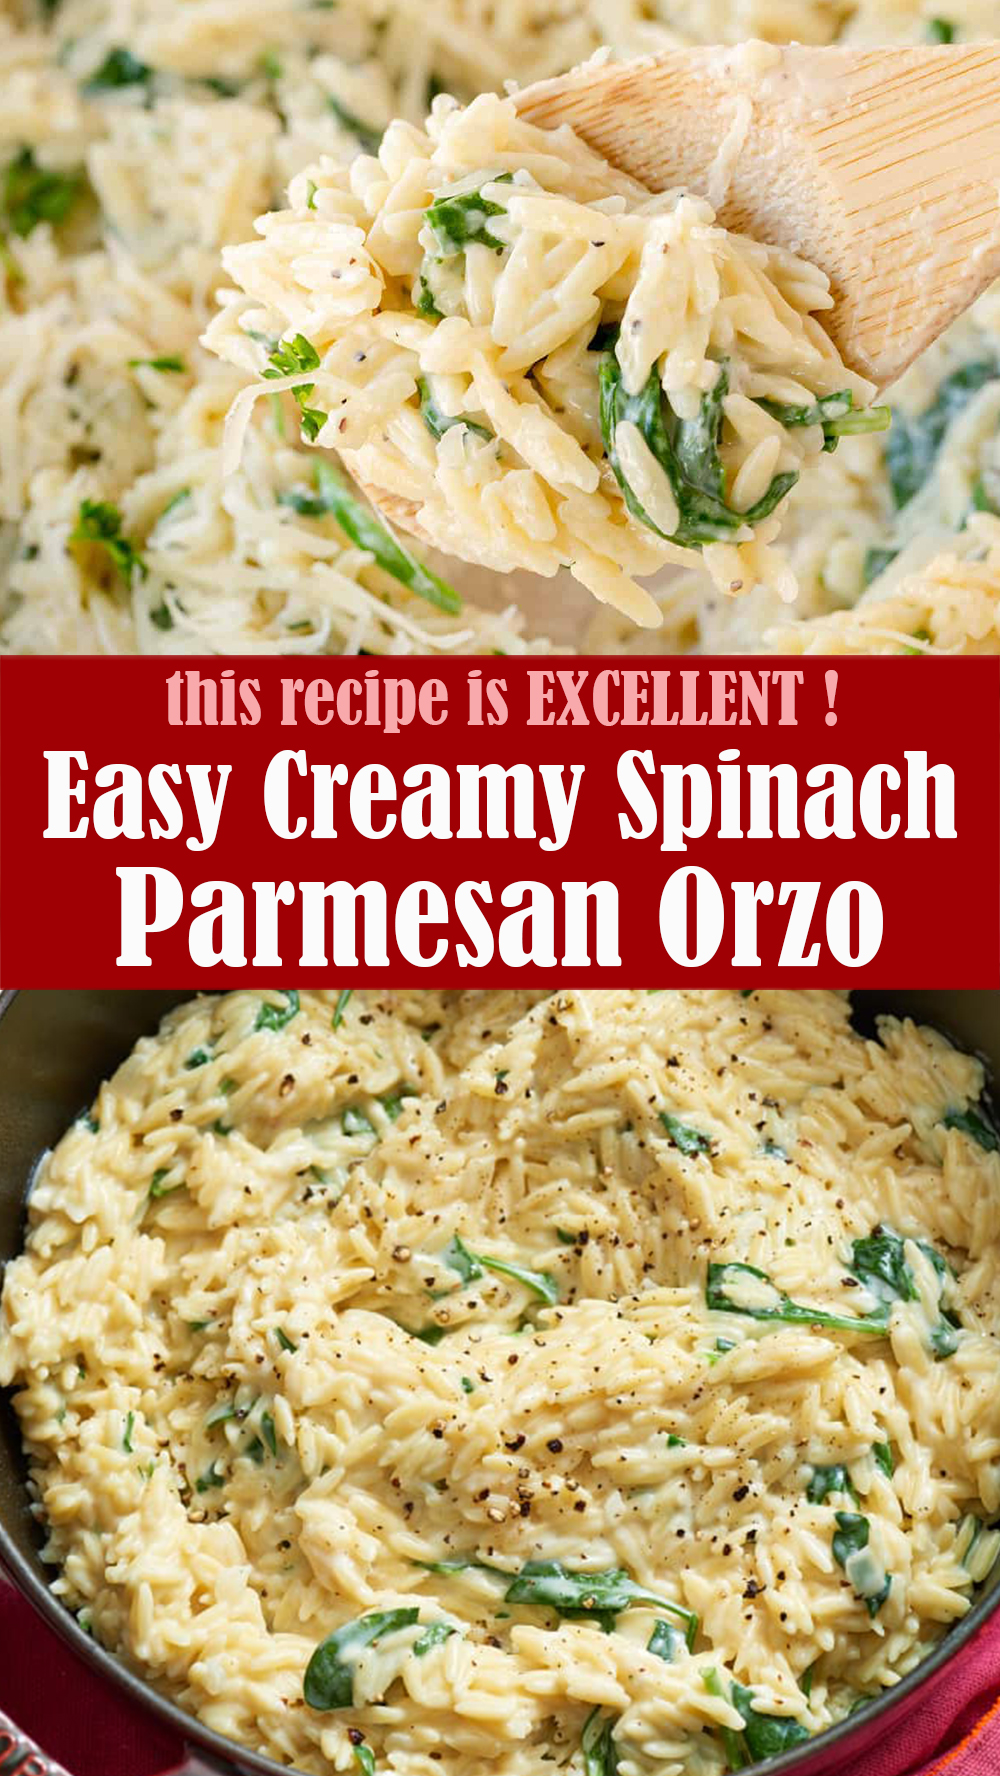 Easy Creamy Spinach Parmesan Orzo